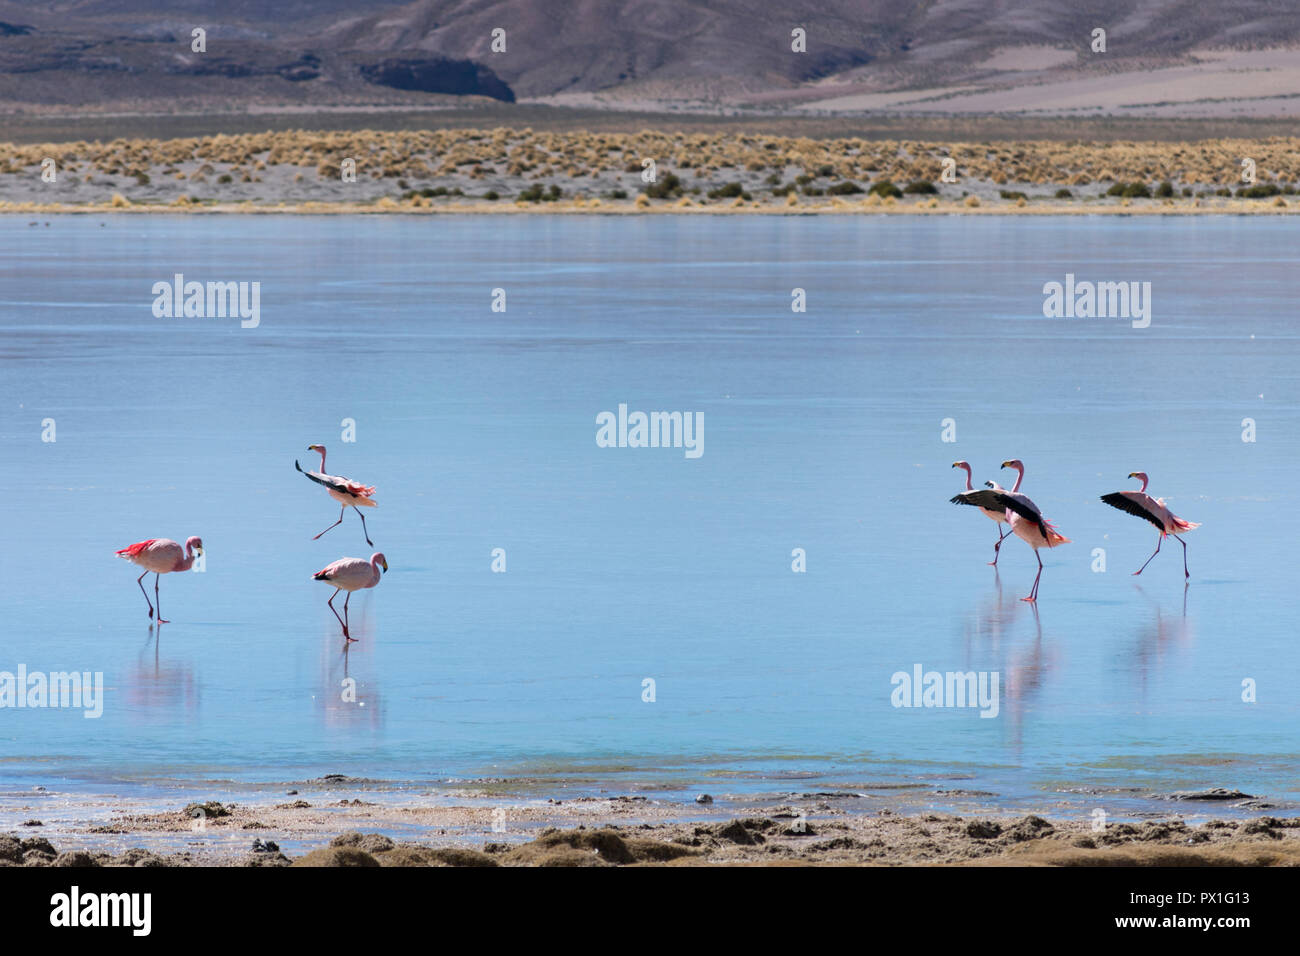 Bolivian flamingos dancing on the water Stock Photo